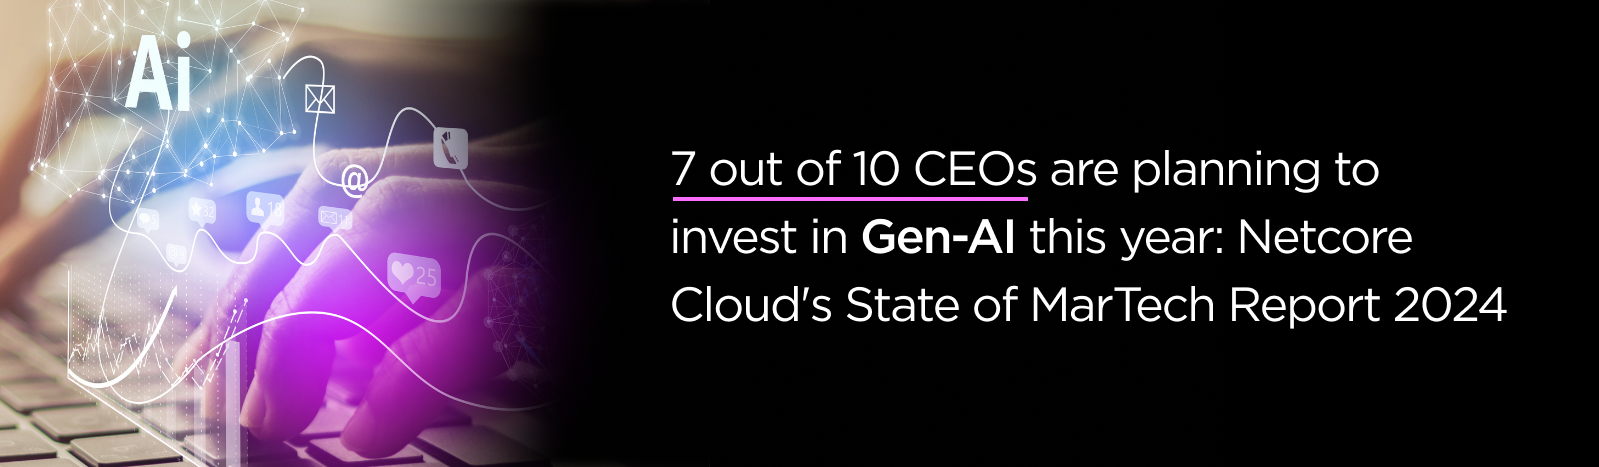 7 out of 10 CEOs are planning to invest in Gen-AI this year: Netcore Cloud's State of MarTech Report 2024